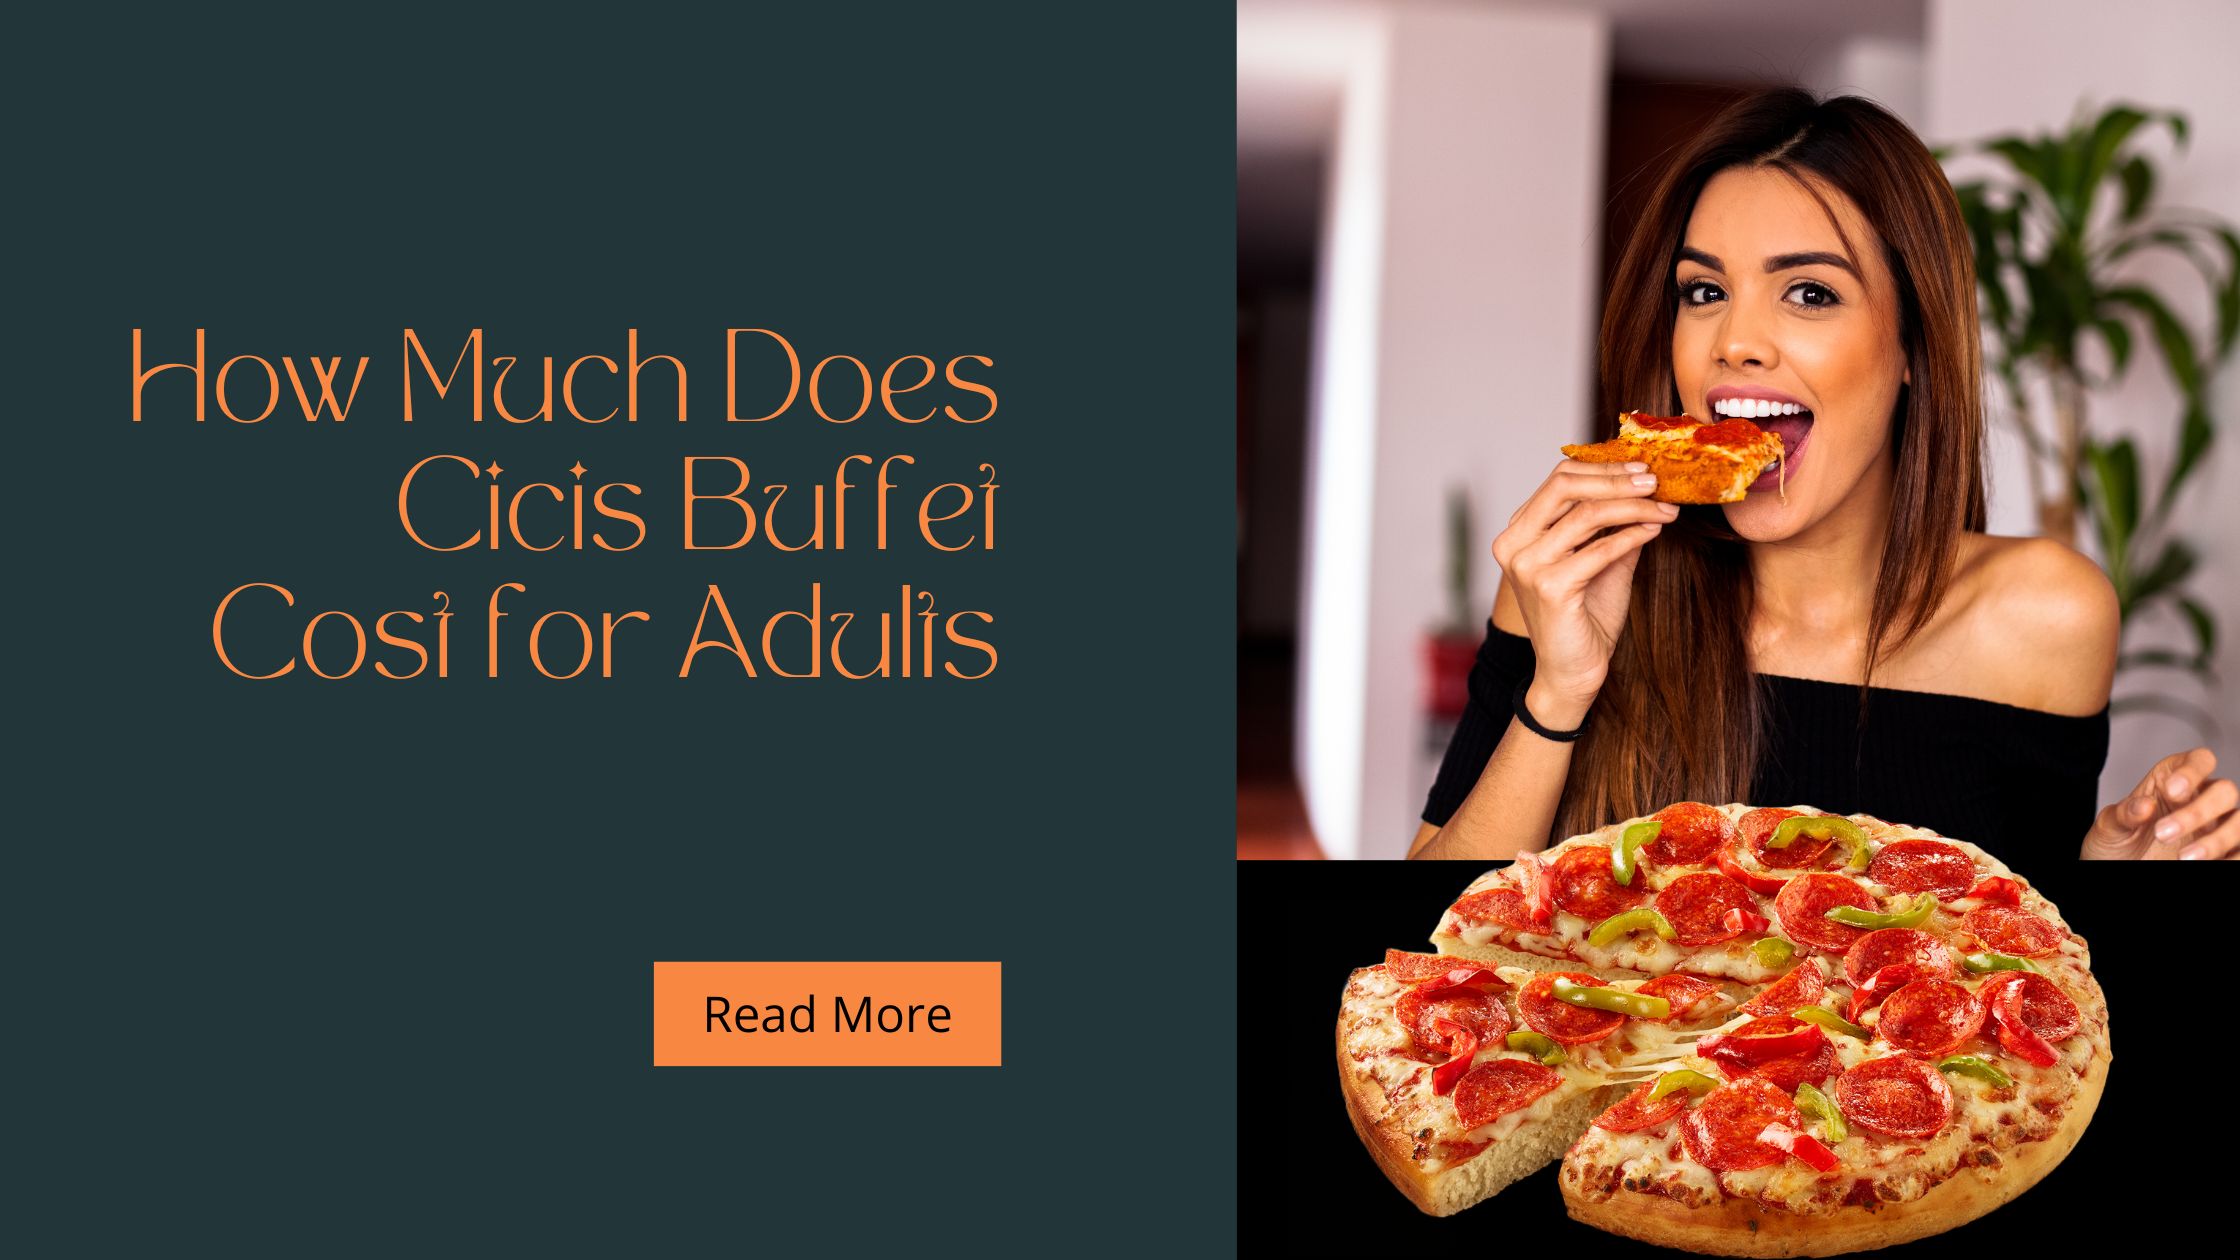 How Much Does Cicis Buffet Cost for Adults in 2023? Pizza Basis